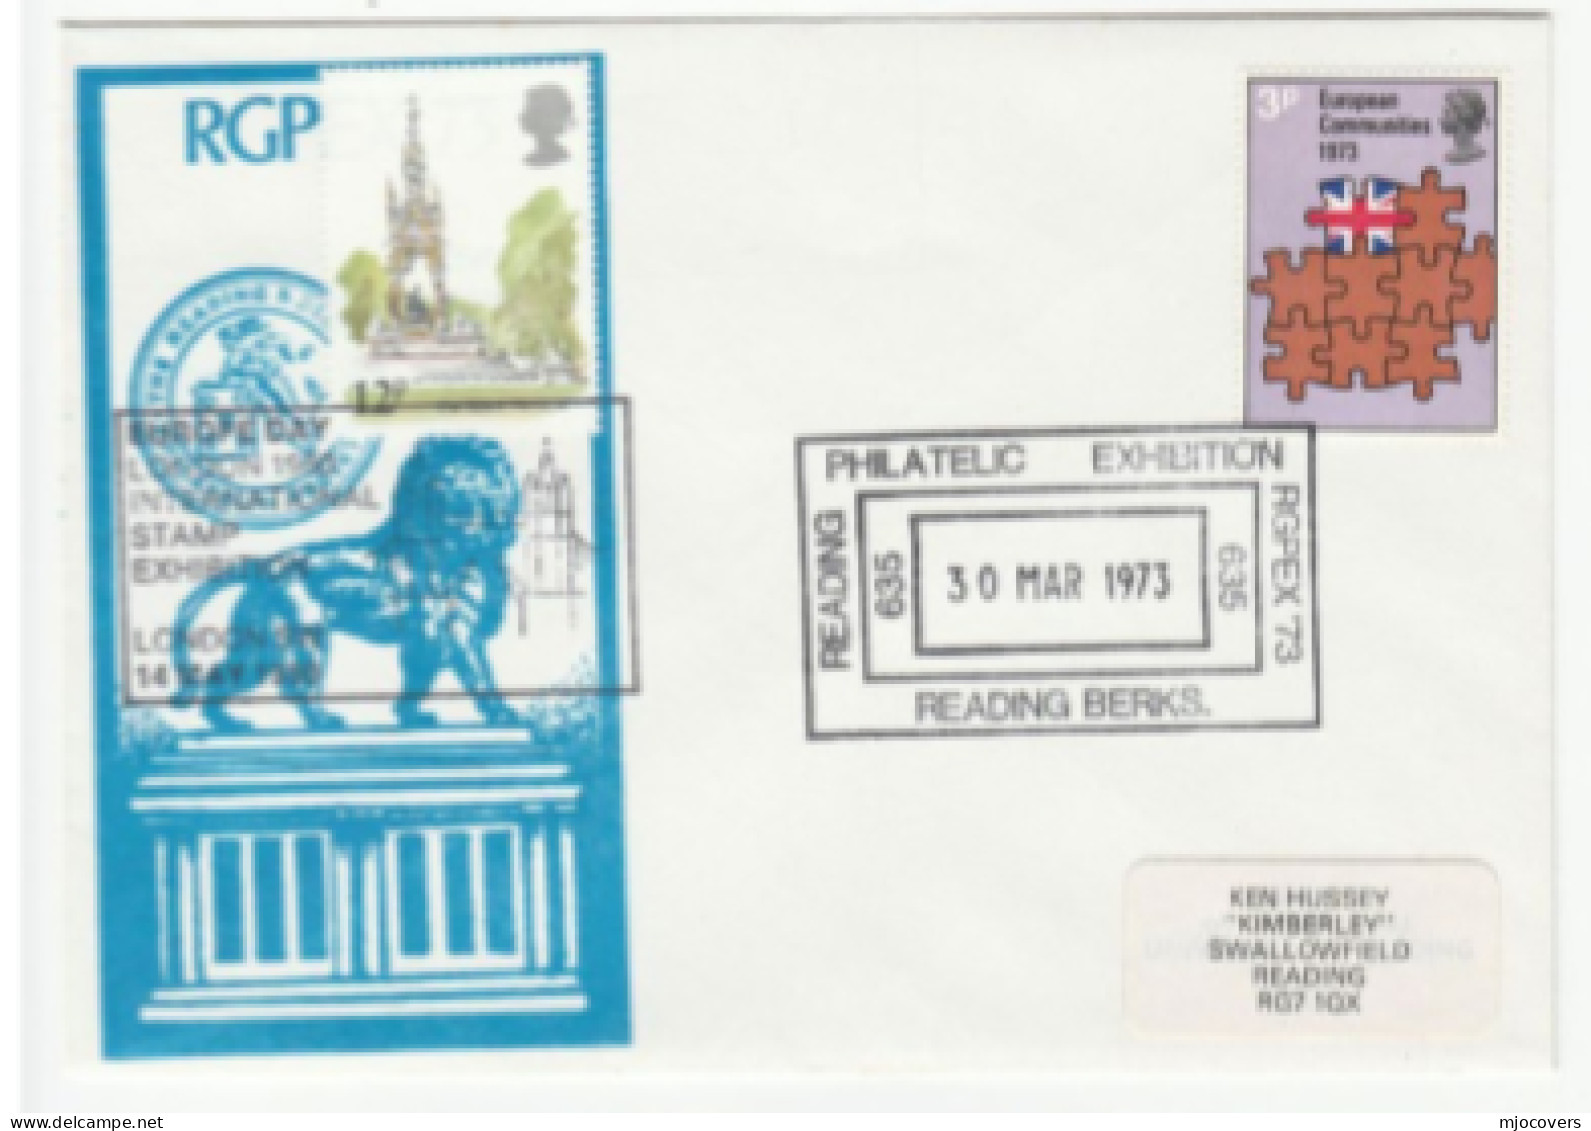 Pair Of The MAIWAND LION Statue READING  EVENT Covers GB Stamps Cover Lions Philatelic Exhibition - Big Cats (cats Of Prey)